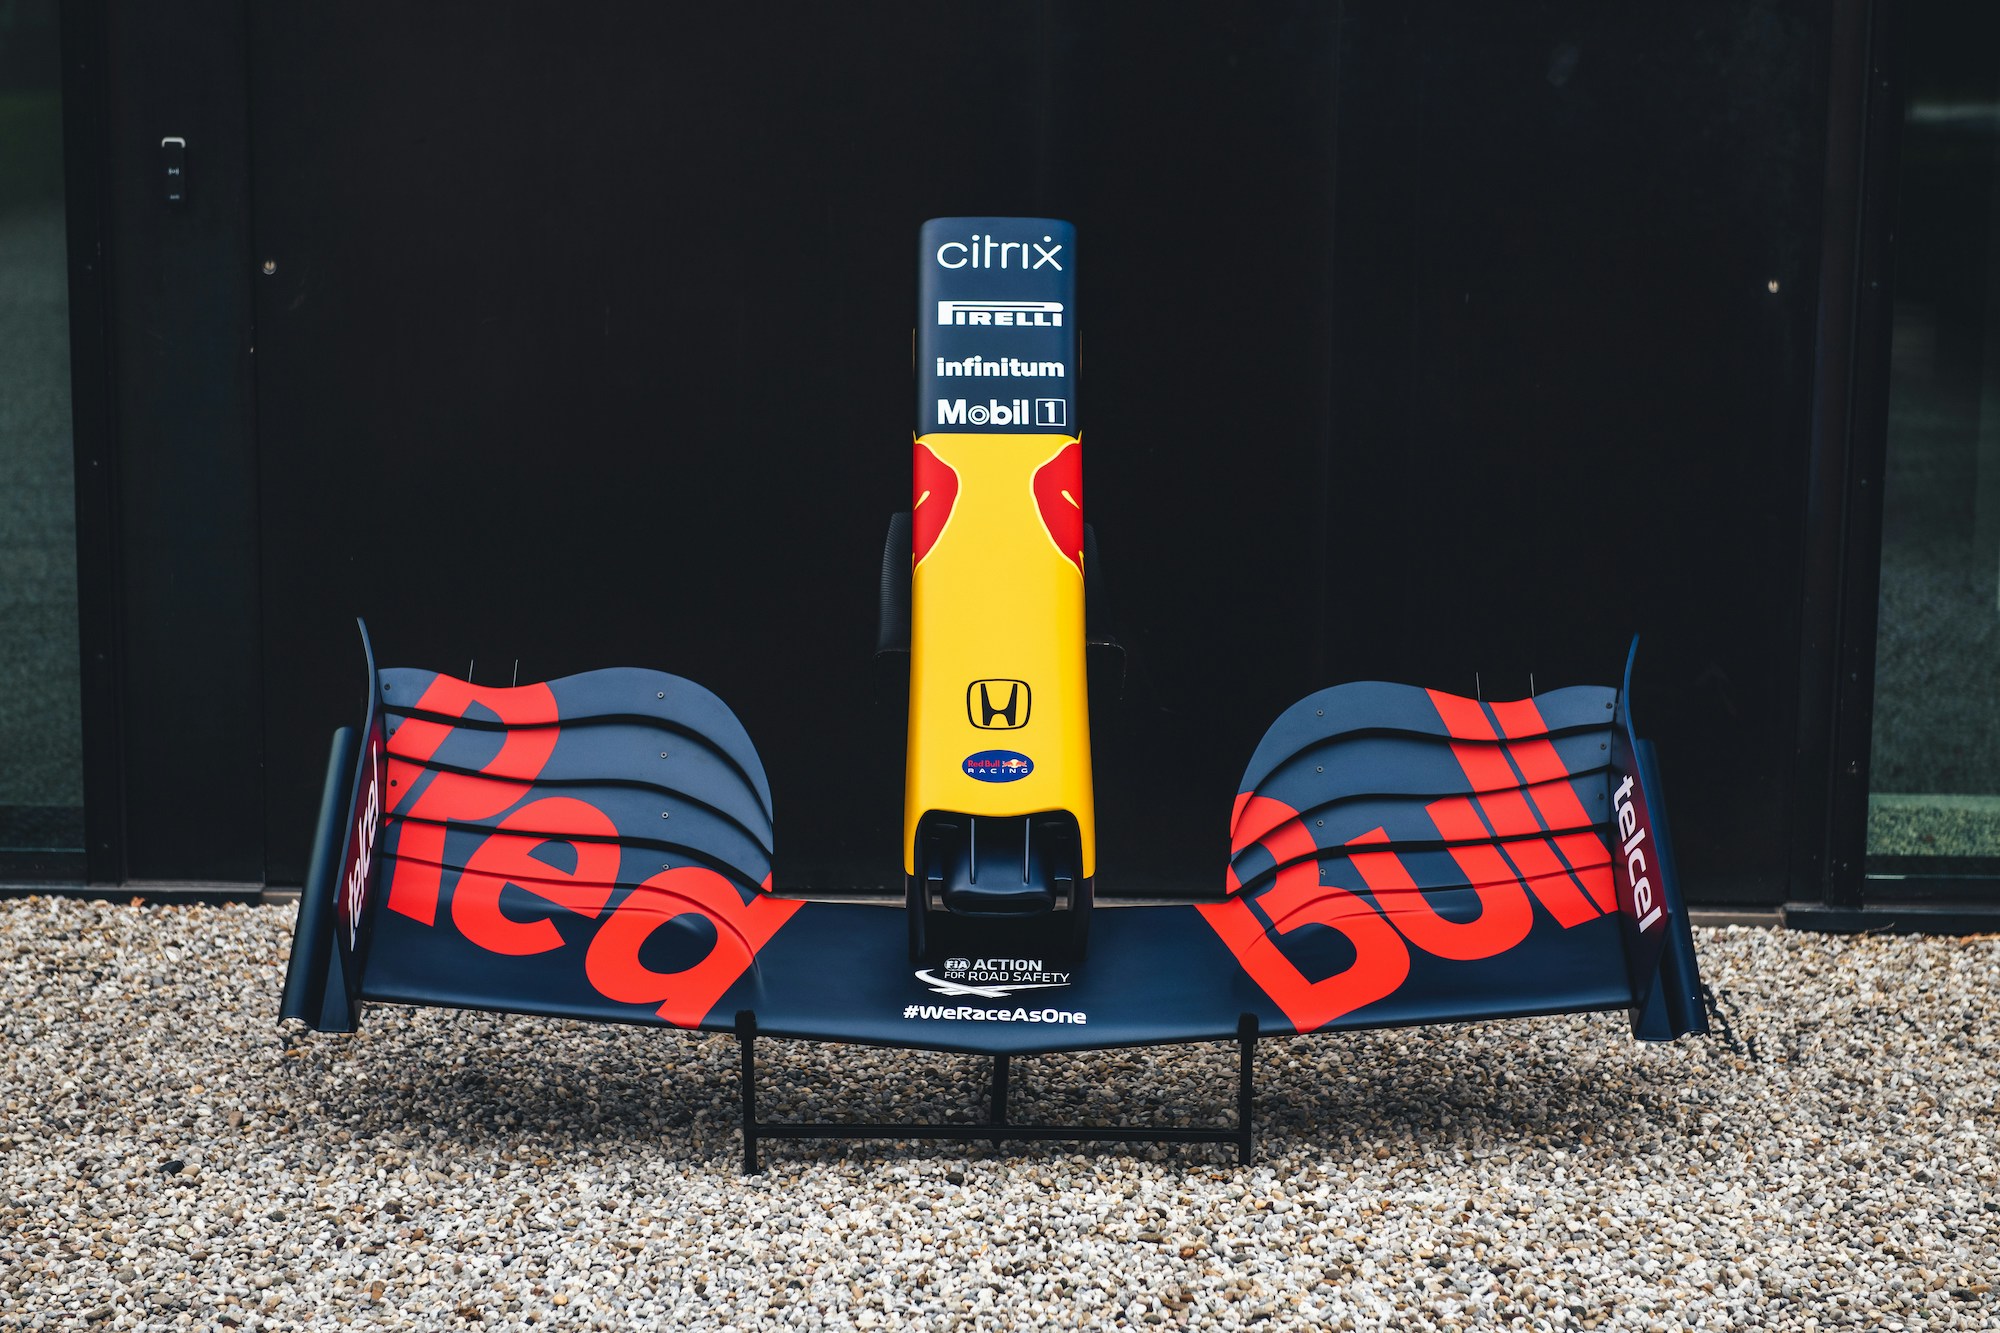 Red Bull Formula 1 Stickers for Sale